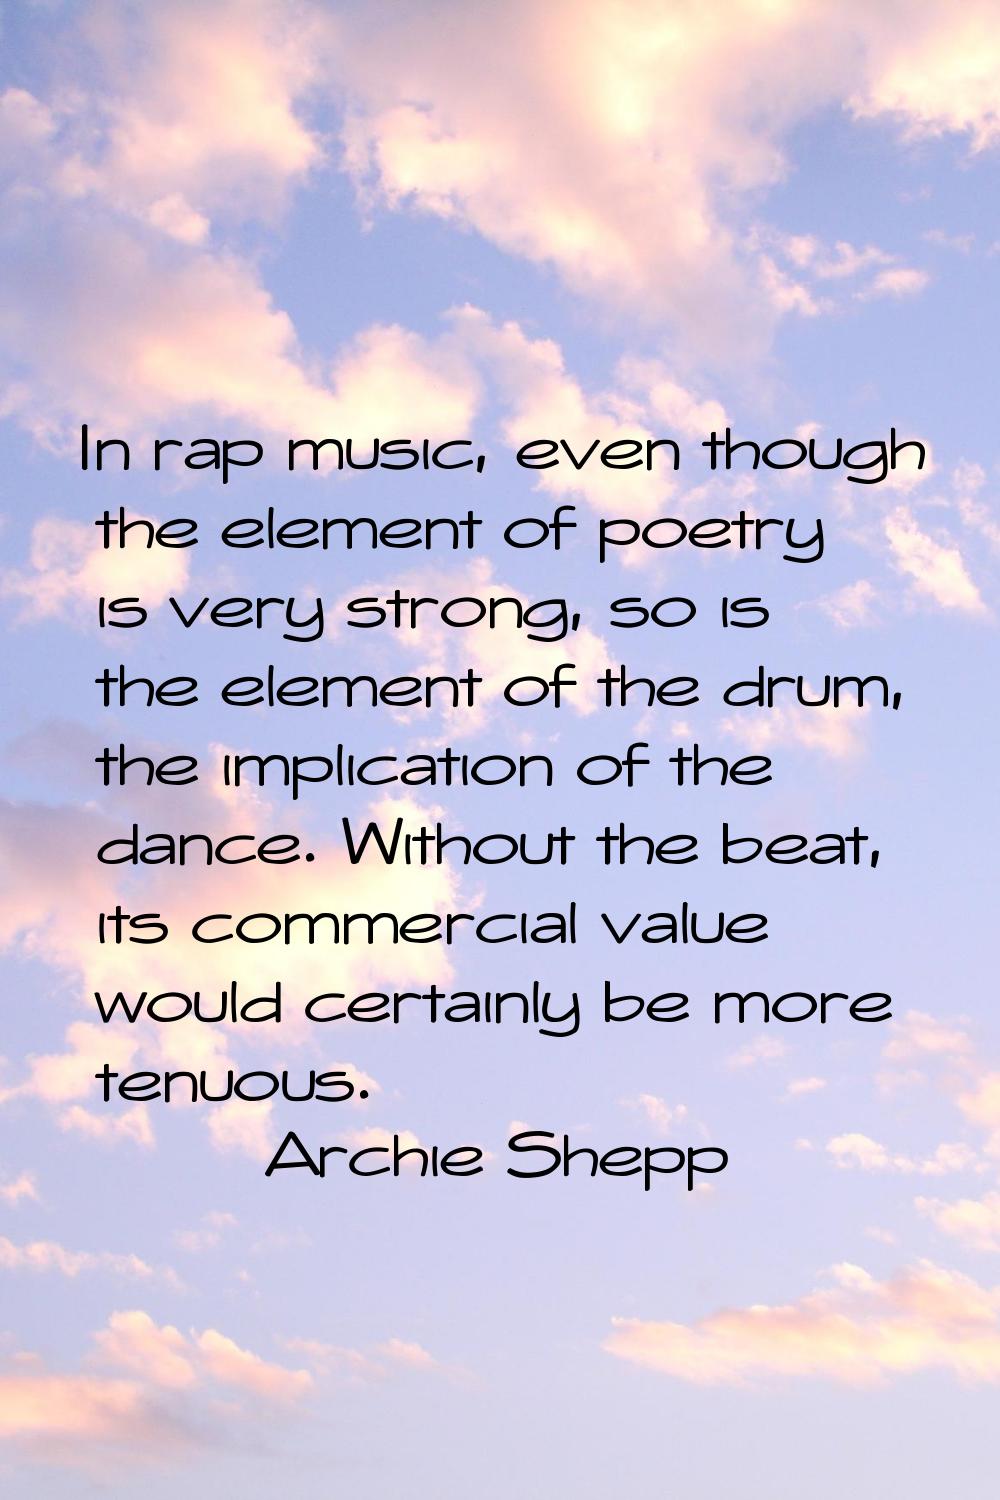 In rap music, even though the element of poetry is very strong, so is the element of the drum, the 